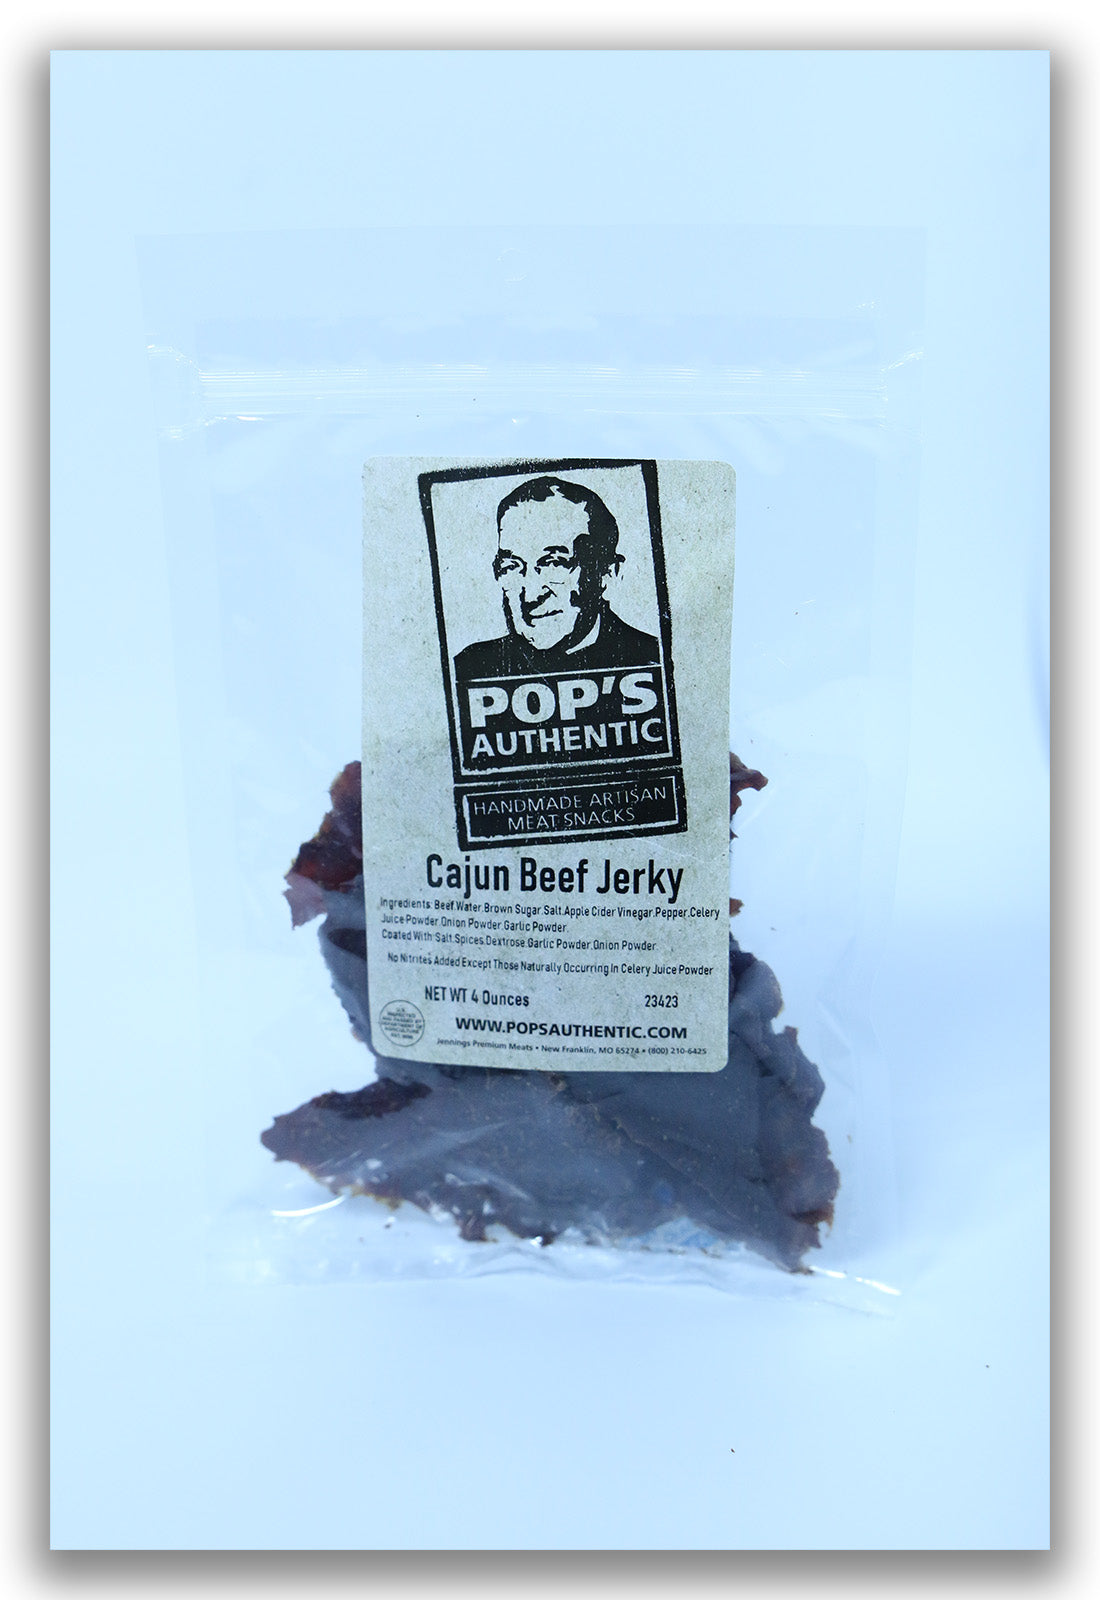 Pop’s Authentic Cajun beef jerky in four ounce package